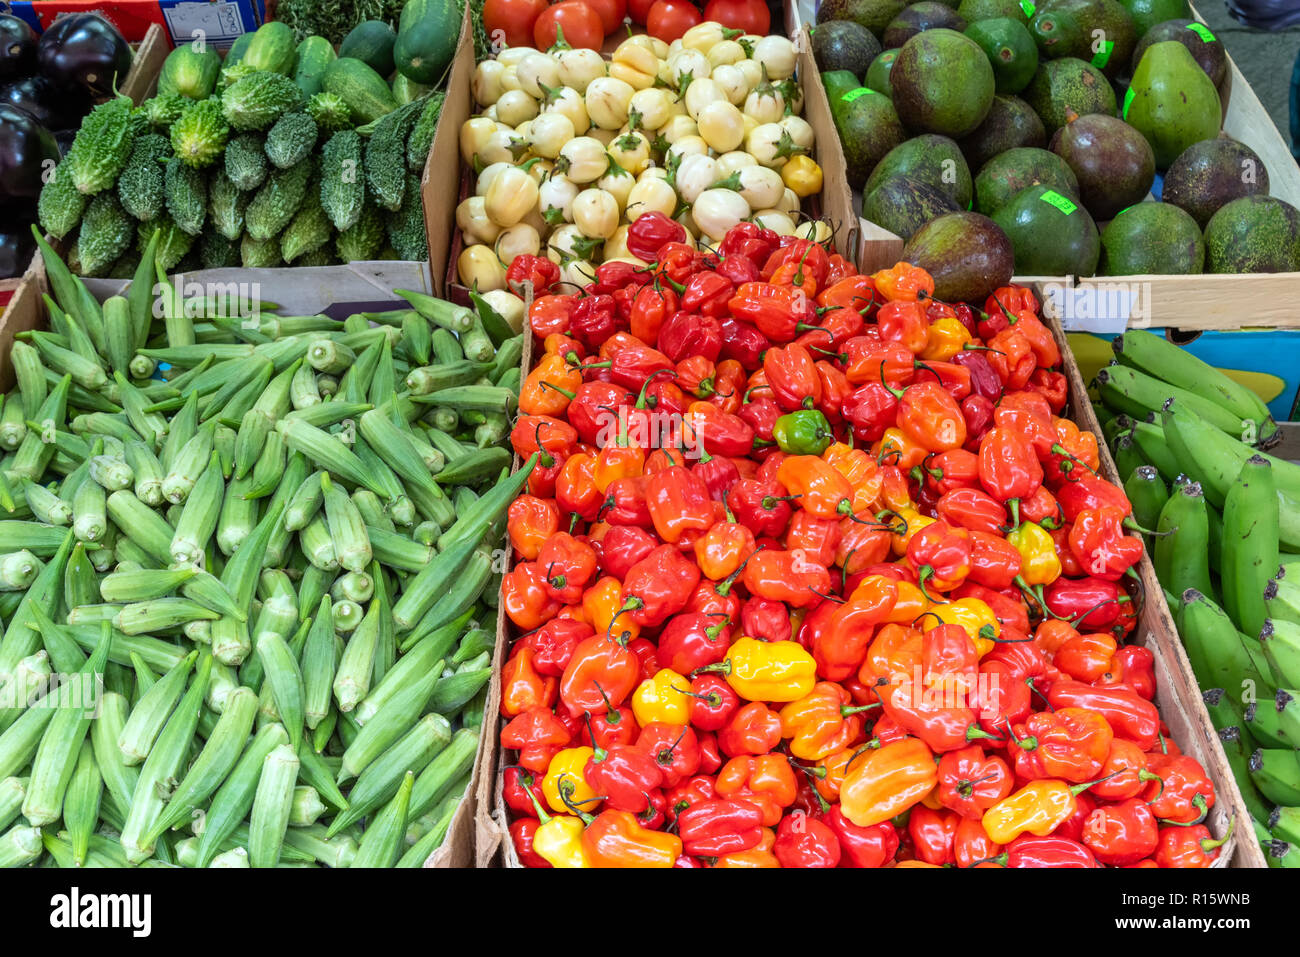 Mini bell peppers, pickles and peas for sale at a market Stock Photo